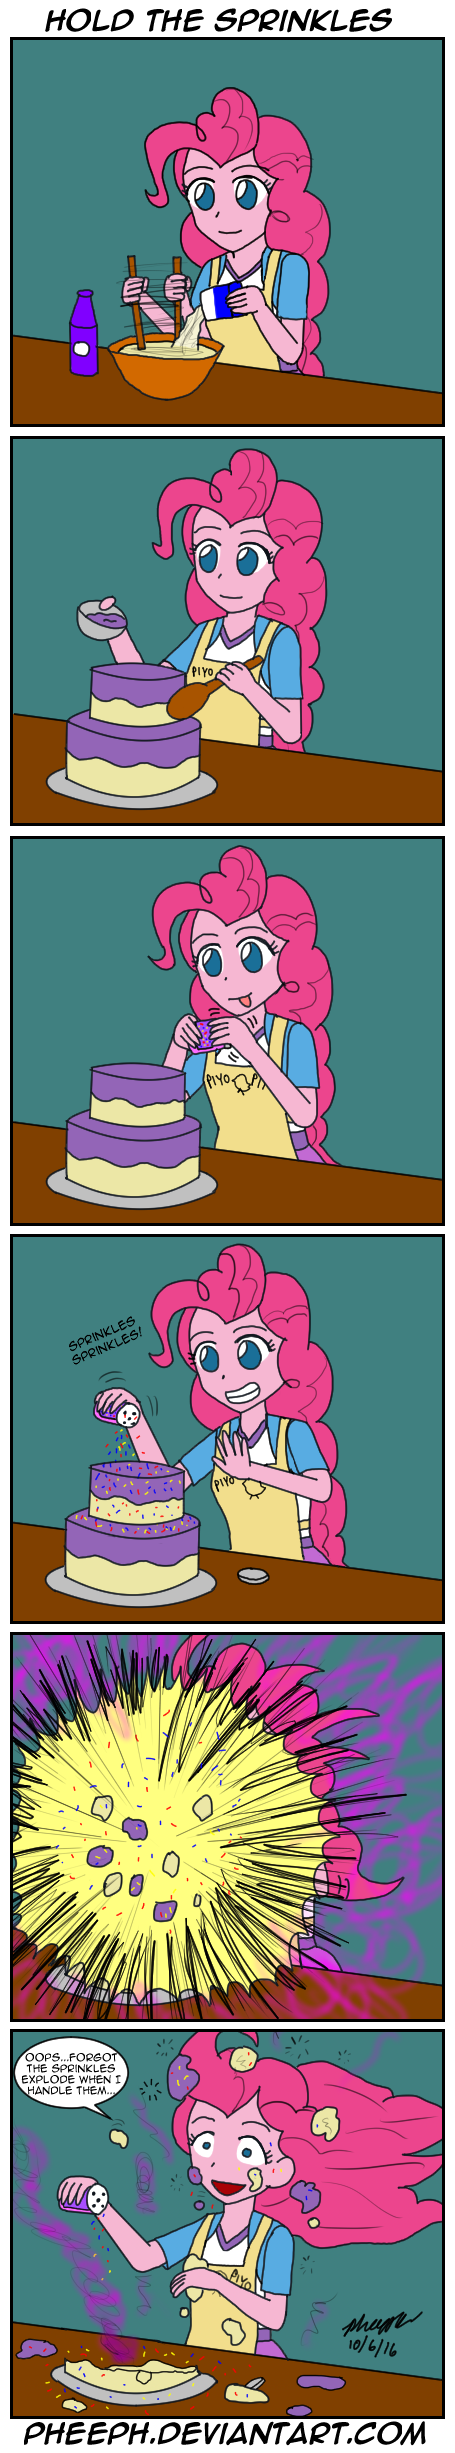 Page 25 - Hold the Sprinkles